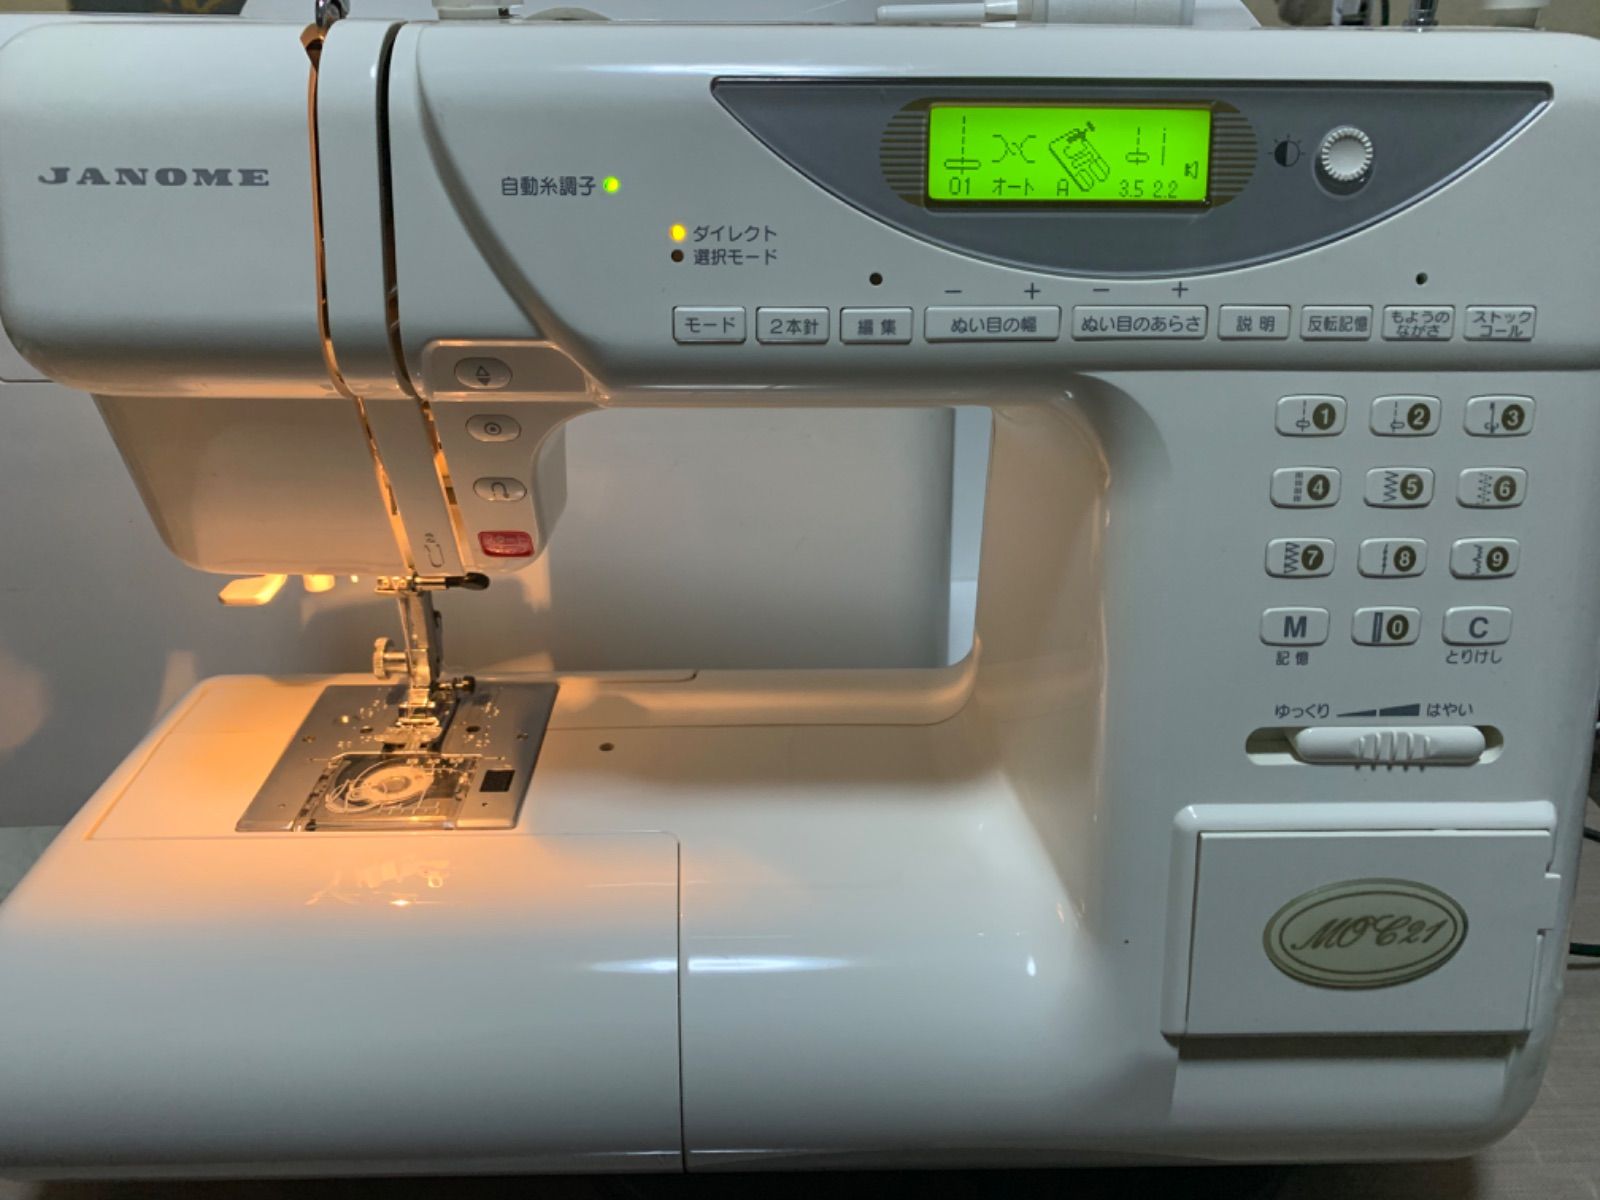 JANOME S6070 コンピューターミシン-